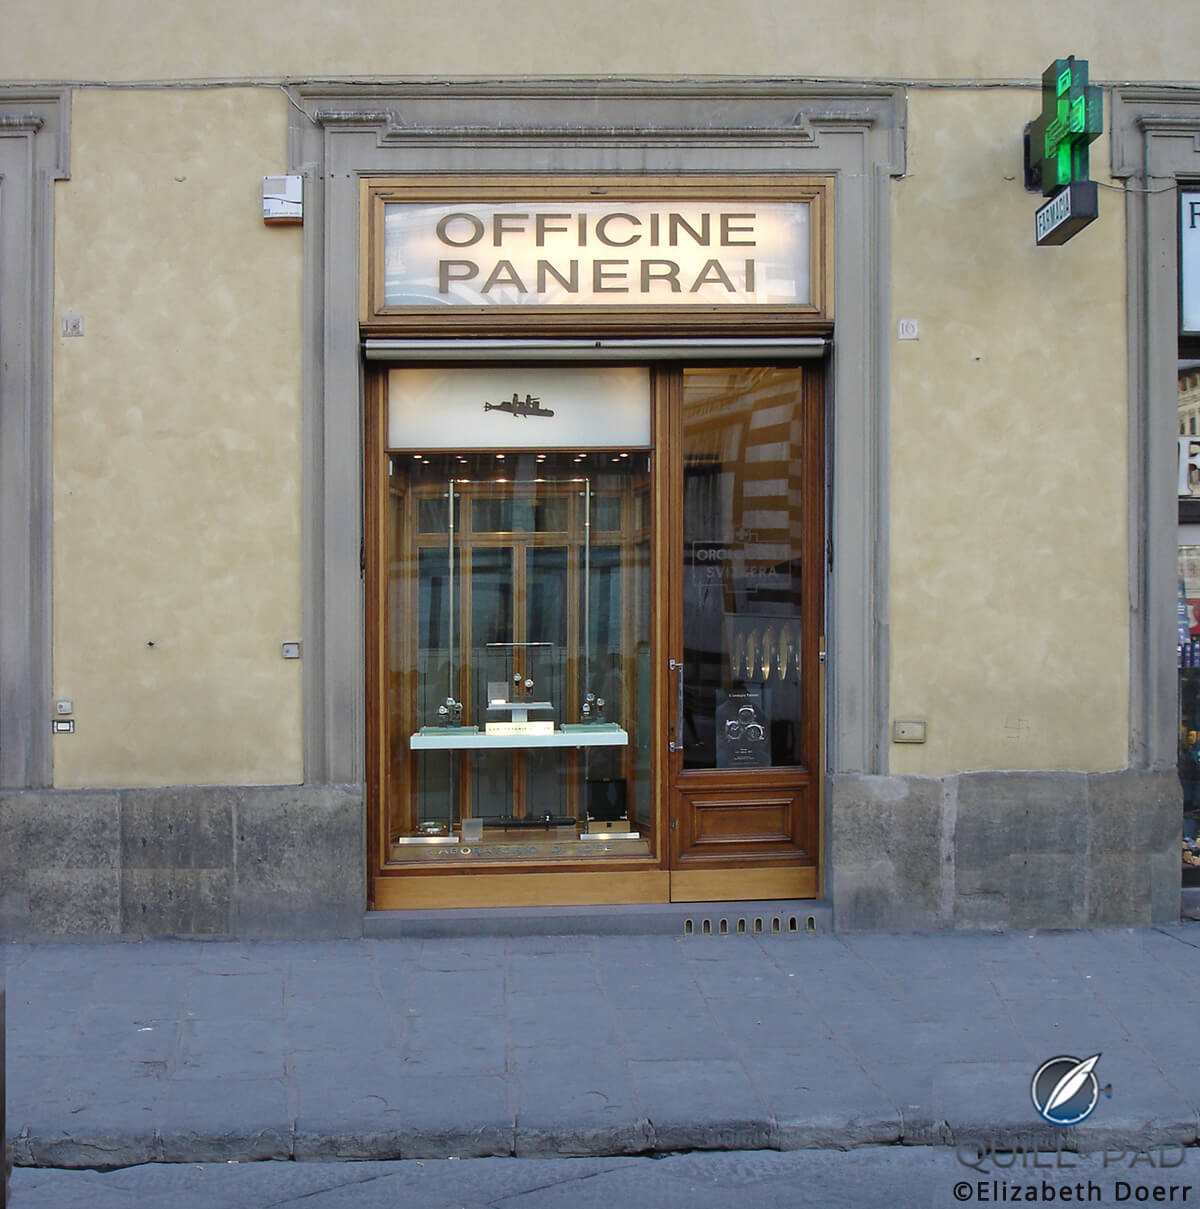 The Officine Panerai boutique in Florence, Italy